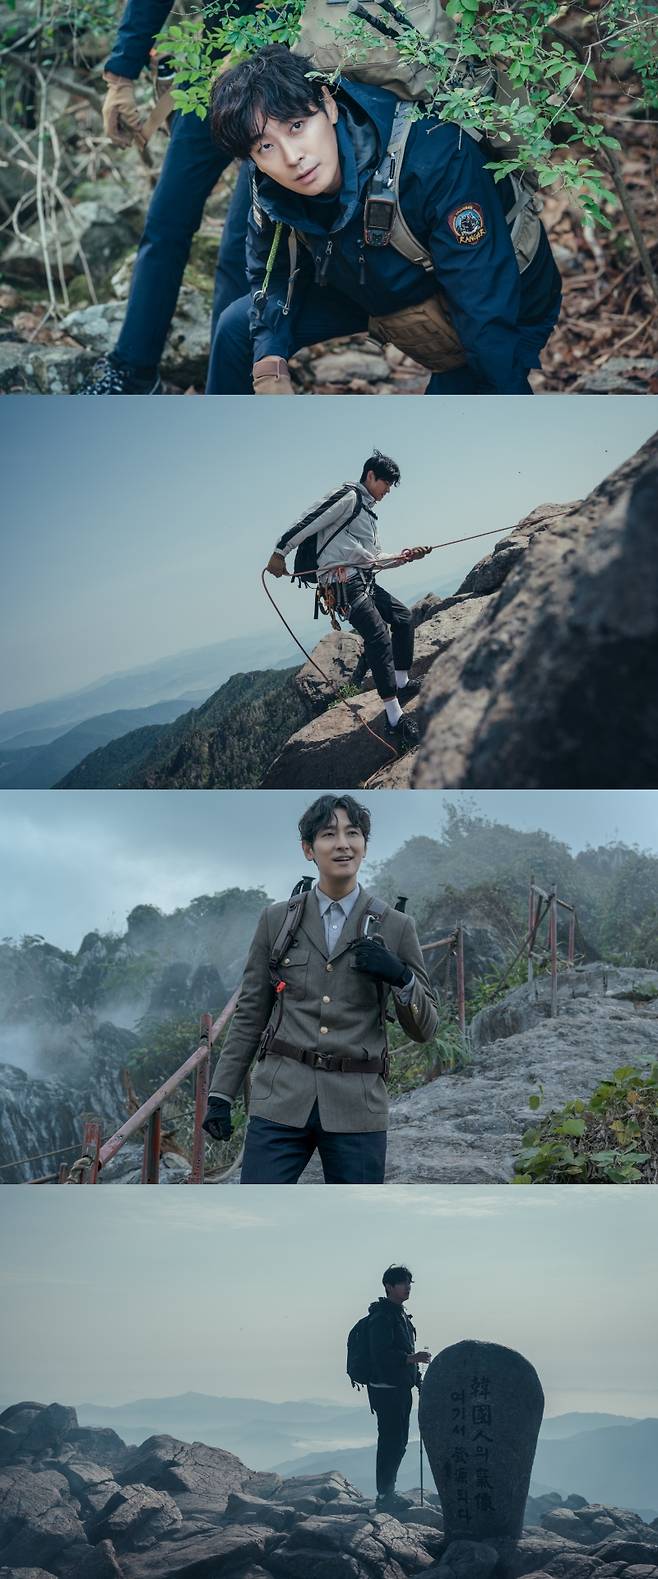 TVNs 15th anniversary special project Jirisan (played by Kim Eun-hee, director Lee Eung-bok, production Aesto and Studio Dragon and Wind Pictures) released the first character steel of Ju Ji-hoon, who played the role of new Ranger gang hyun on the 1st.Jirisan is a mystery drama depicting the story of a new Ranger gang hyun (Ju Ji-hoon) with the best ranger Seoi River (Jeon Ji-hyun) and the unspeakable Secret in the Jirisan Great Smoky Mountains National Park, digging into the mysterious thoughts that take place in the mountains.gang hyun is a former army captain from the army and is a new Rangers member of the Jirisan Great Smoky Mountains National Park.In the pose that is drawn down from the bushes in the photo, a subtle playfulness is seen in the pose, and his Yeo Yoo Man Man Smile, who is wearing a Ranger uniform, is seen in the mountains.The intense appearances of the ranger that protects mountains and people are also revealed, attracting attention. Especially, the way it descends on a rope from a shaved cliff is dizzying.The blue ridge overlooking at a glance causes admiration, but the altitude that high increases the tension.The gang hyun, who depends only on the rope connected to the climbing harness on the waist, raises the question of what the dangerous rock fall would have been to find.The scene that reached the top of Jirisan at 1915m above sea level also gives a superb view.Jirisans vast uncanny, the mystery that gang hyun will face here, and the meaningful secret Identity he is hiding.The production team said, gang hyun is a charming character that is possible because it is only Ju Ji-hoon.I hope that Ju Ji-hoon will show the power that is not defined on either side. Jirisan will be broadcasted at 9 pm on October 23rd.